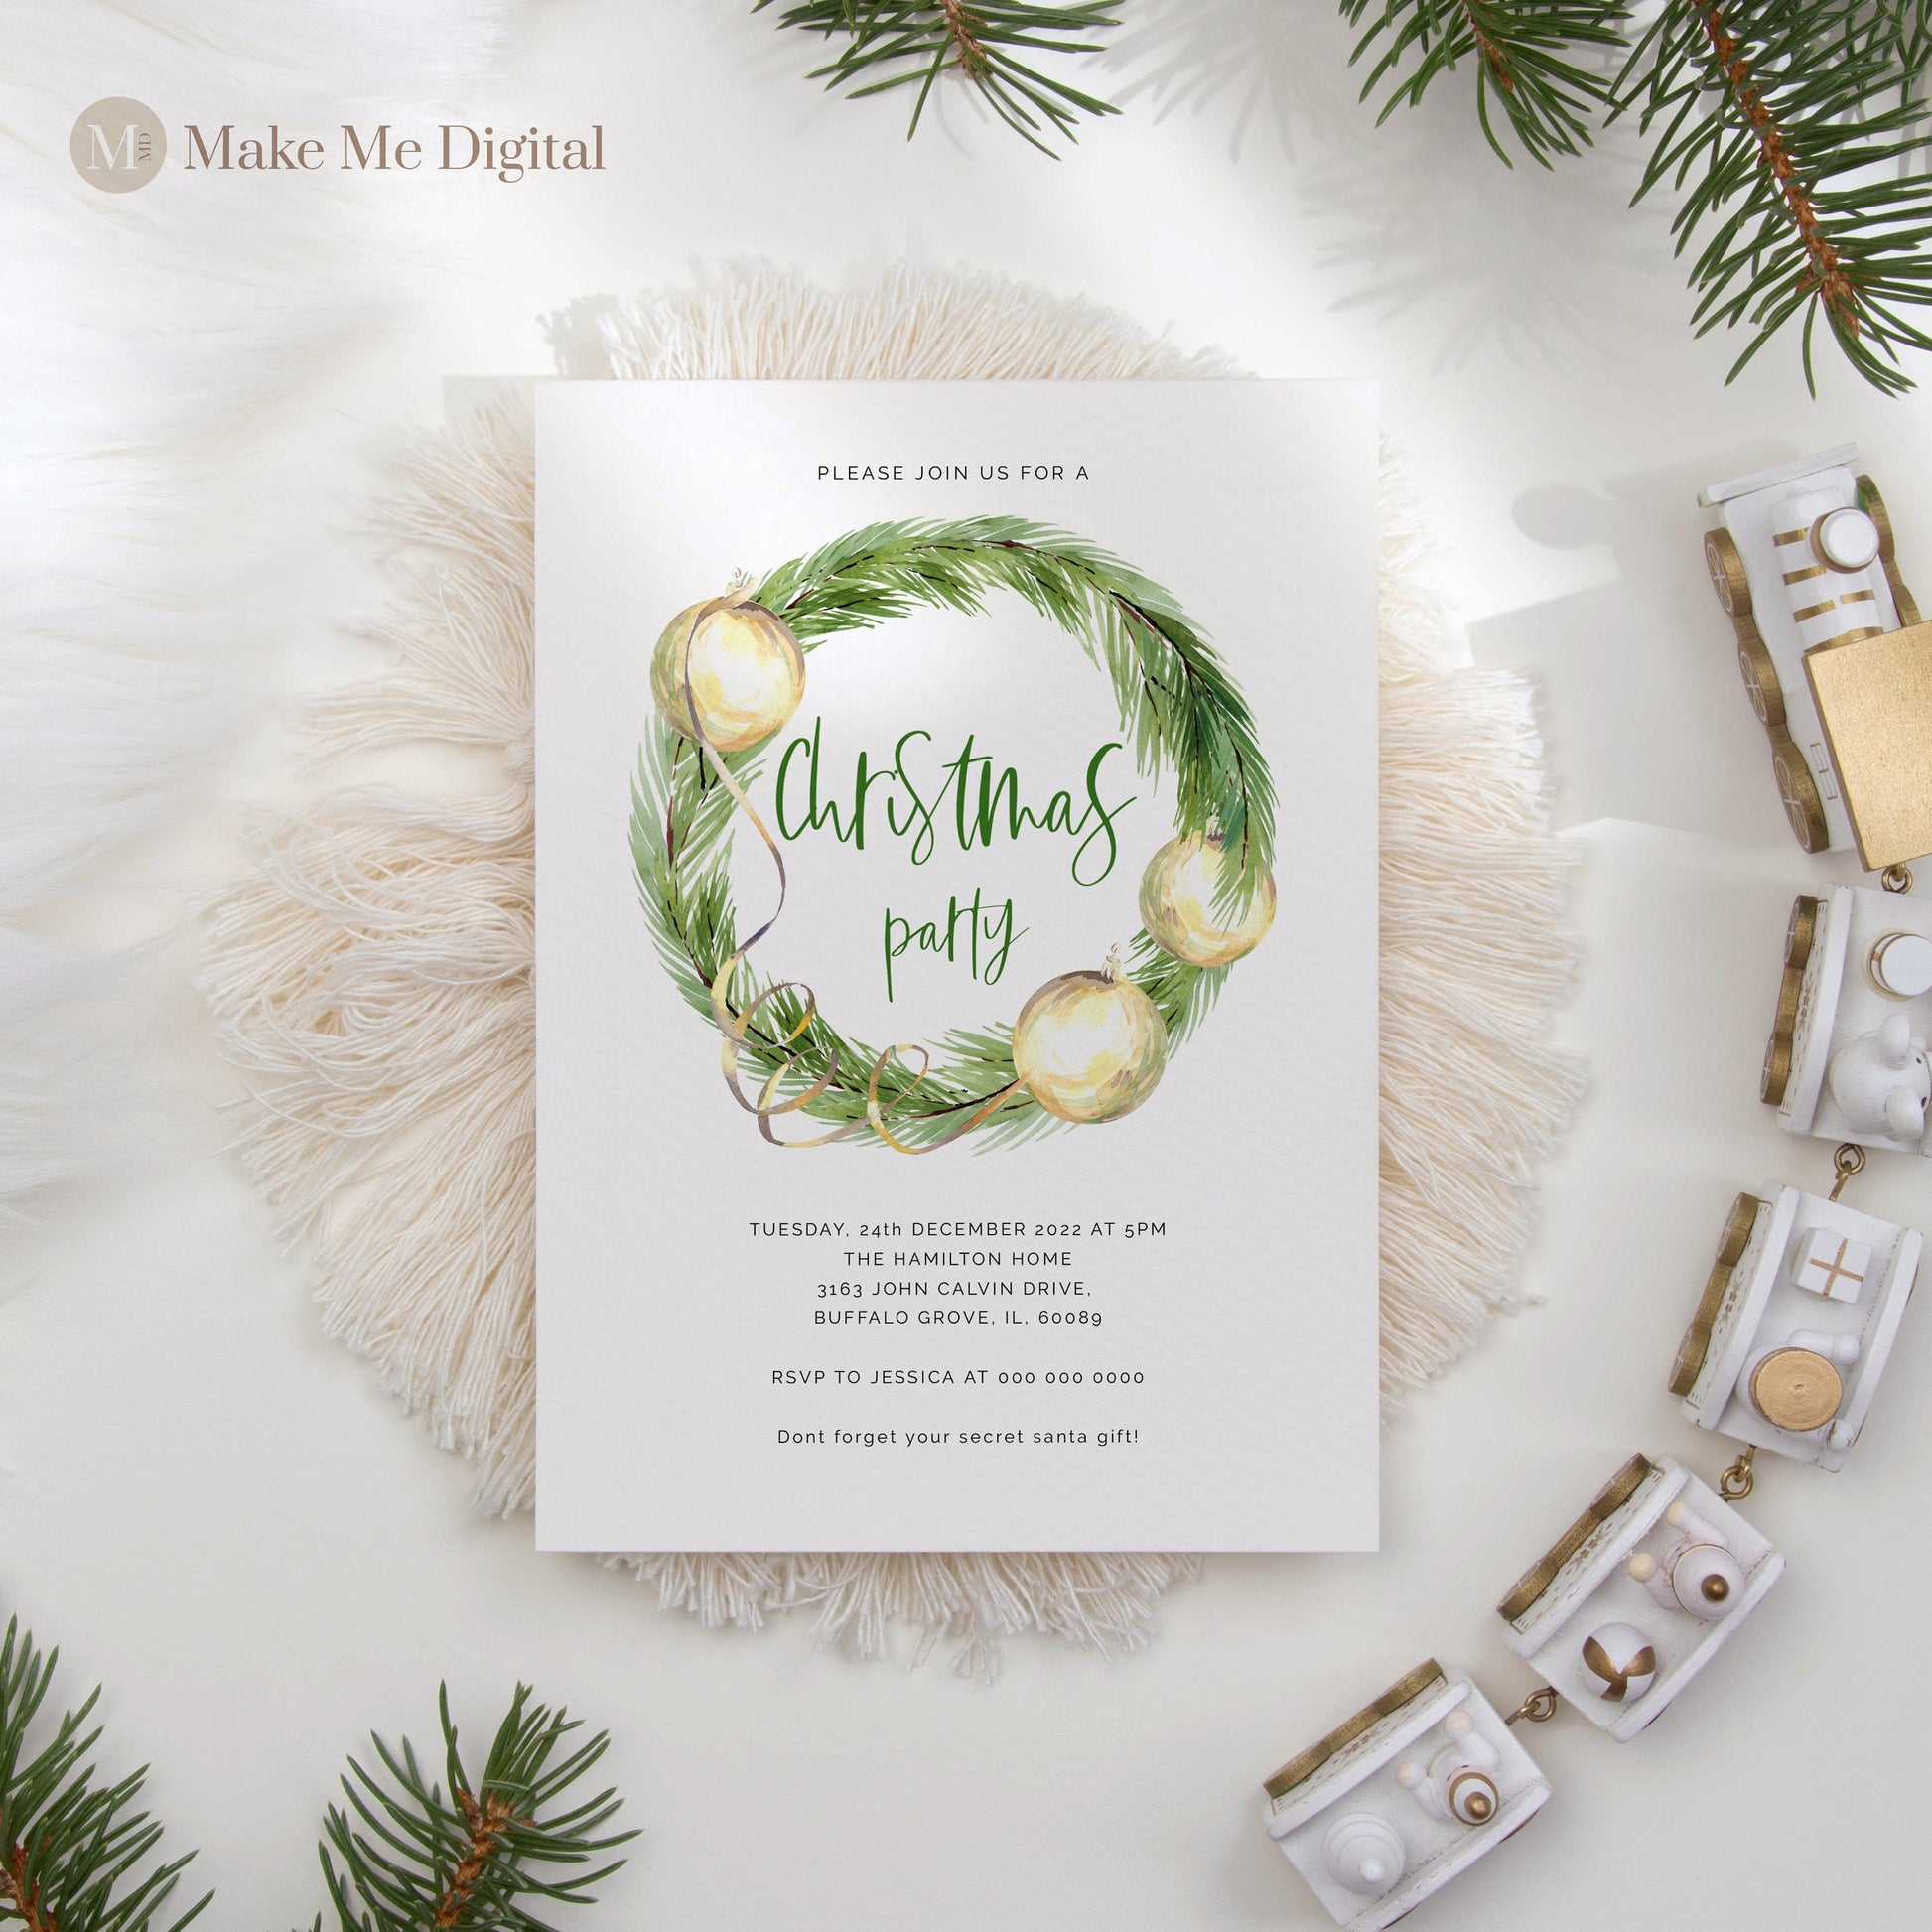 Green & Gold Christmas Party Invitation - Make Me Digital: printable event invitations, party games & decor